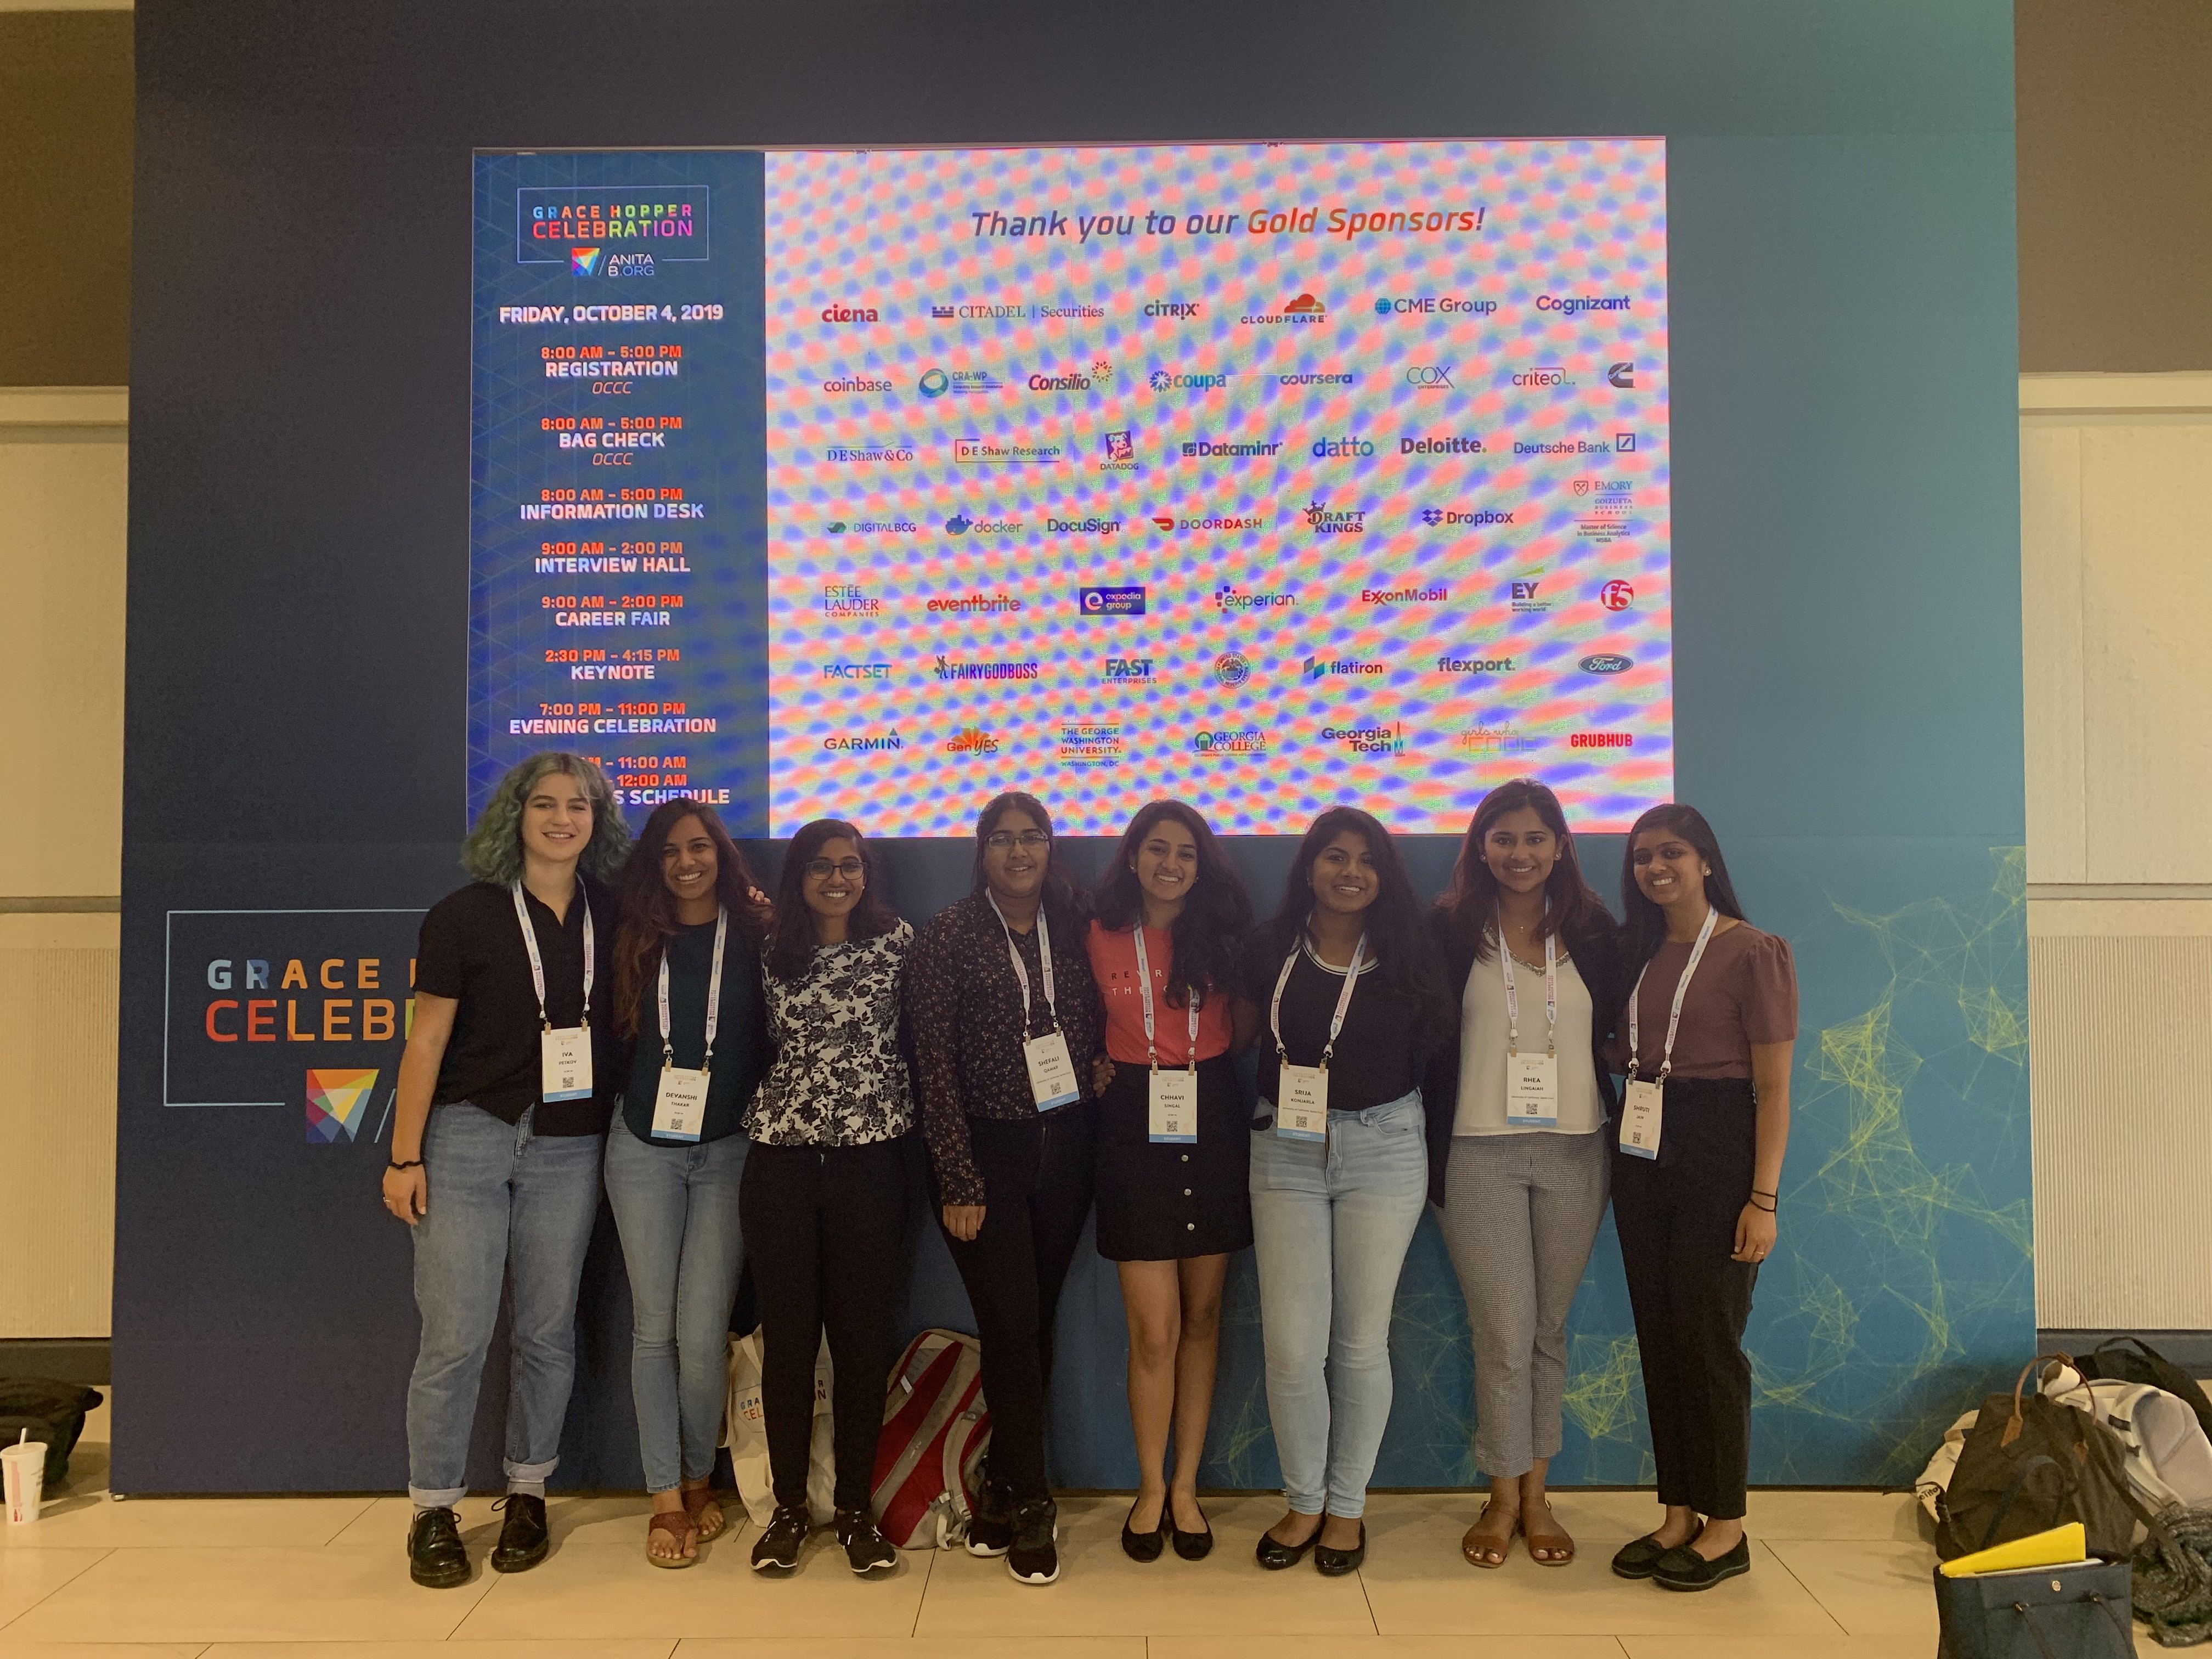 Part of the UCSC representation at GHC 2019